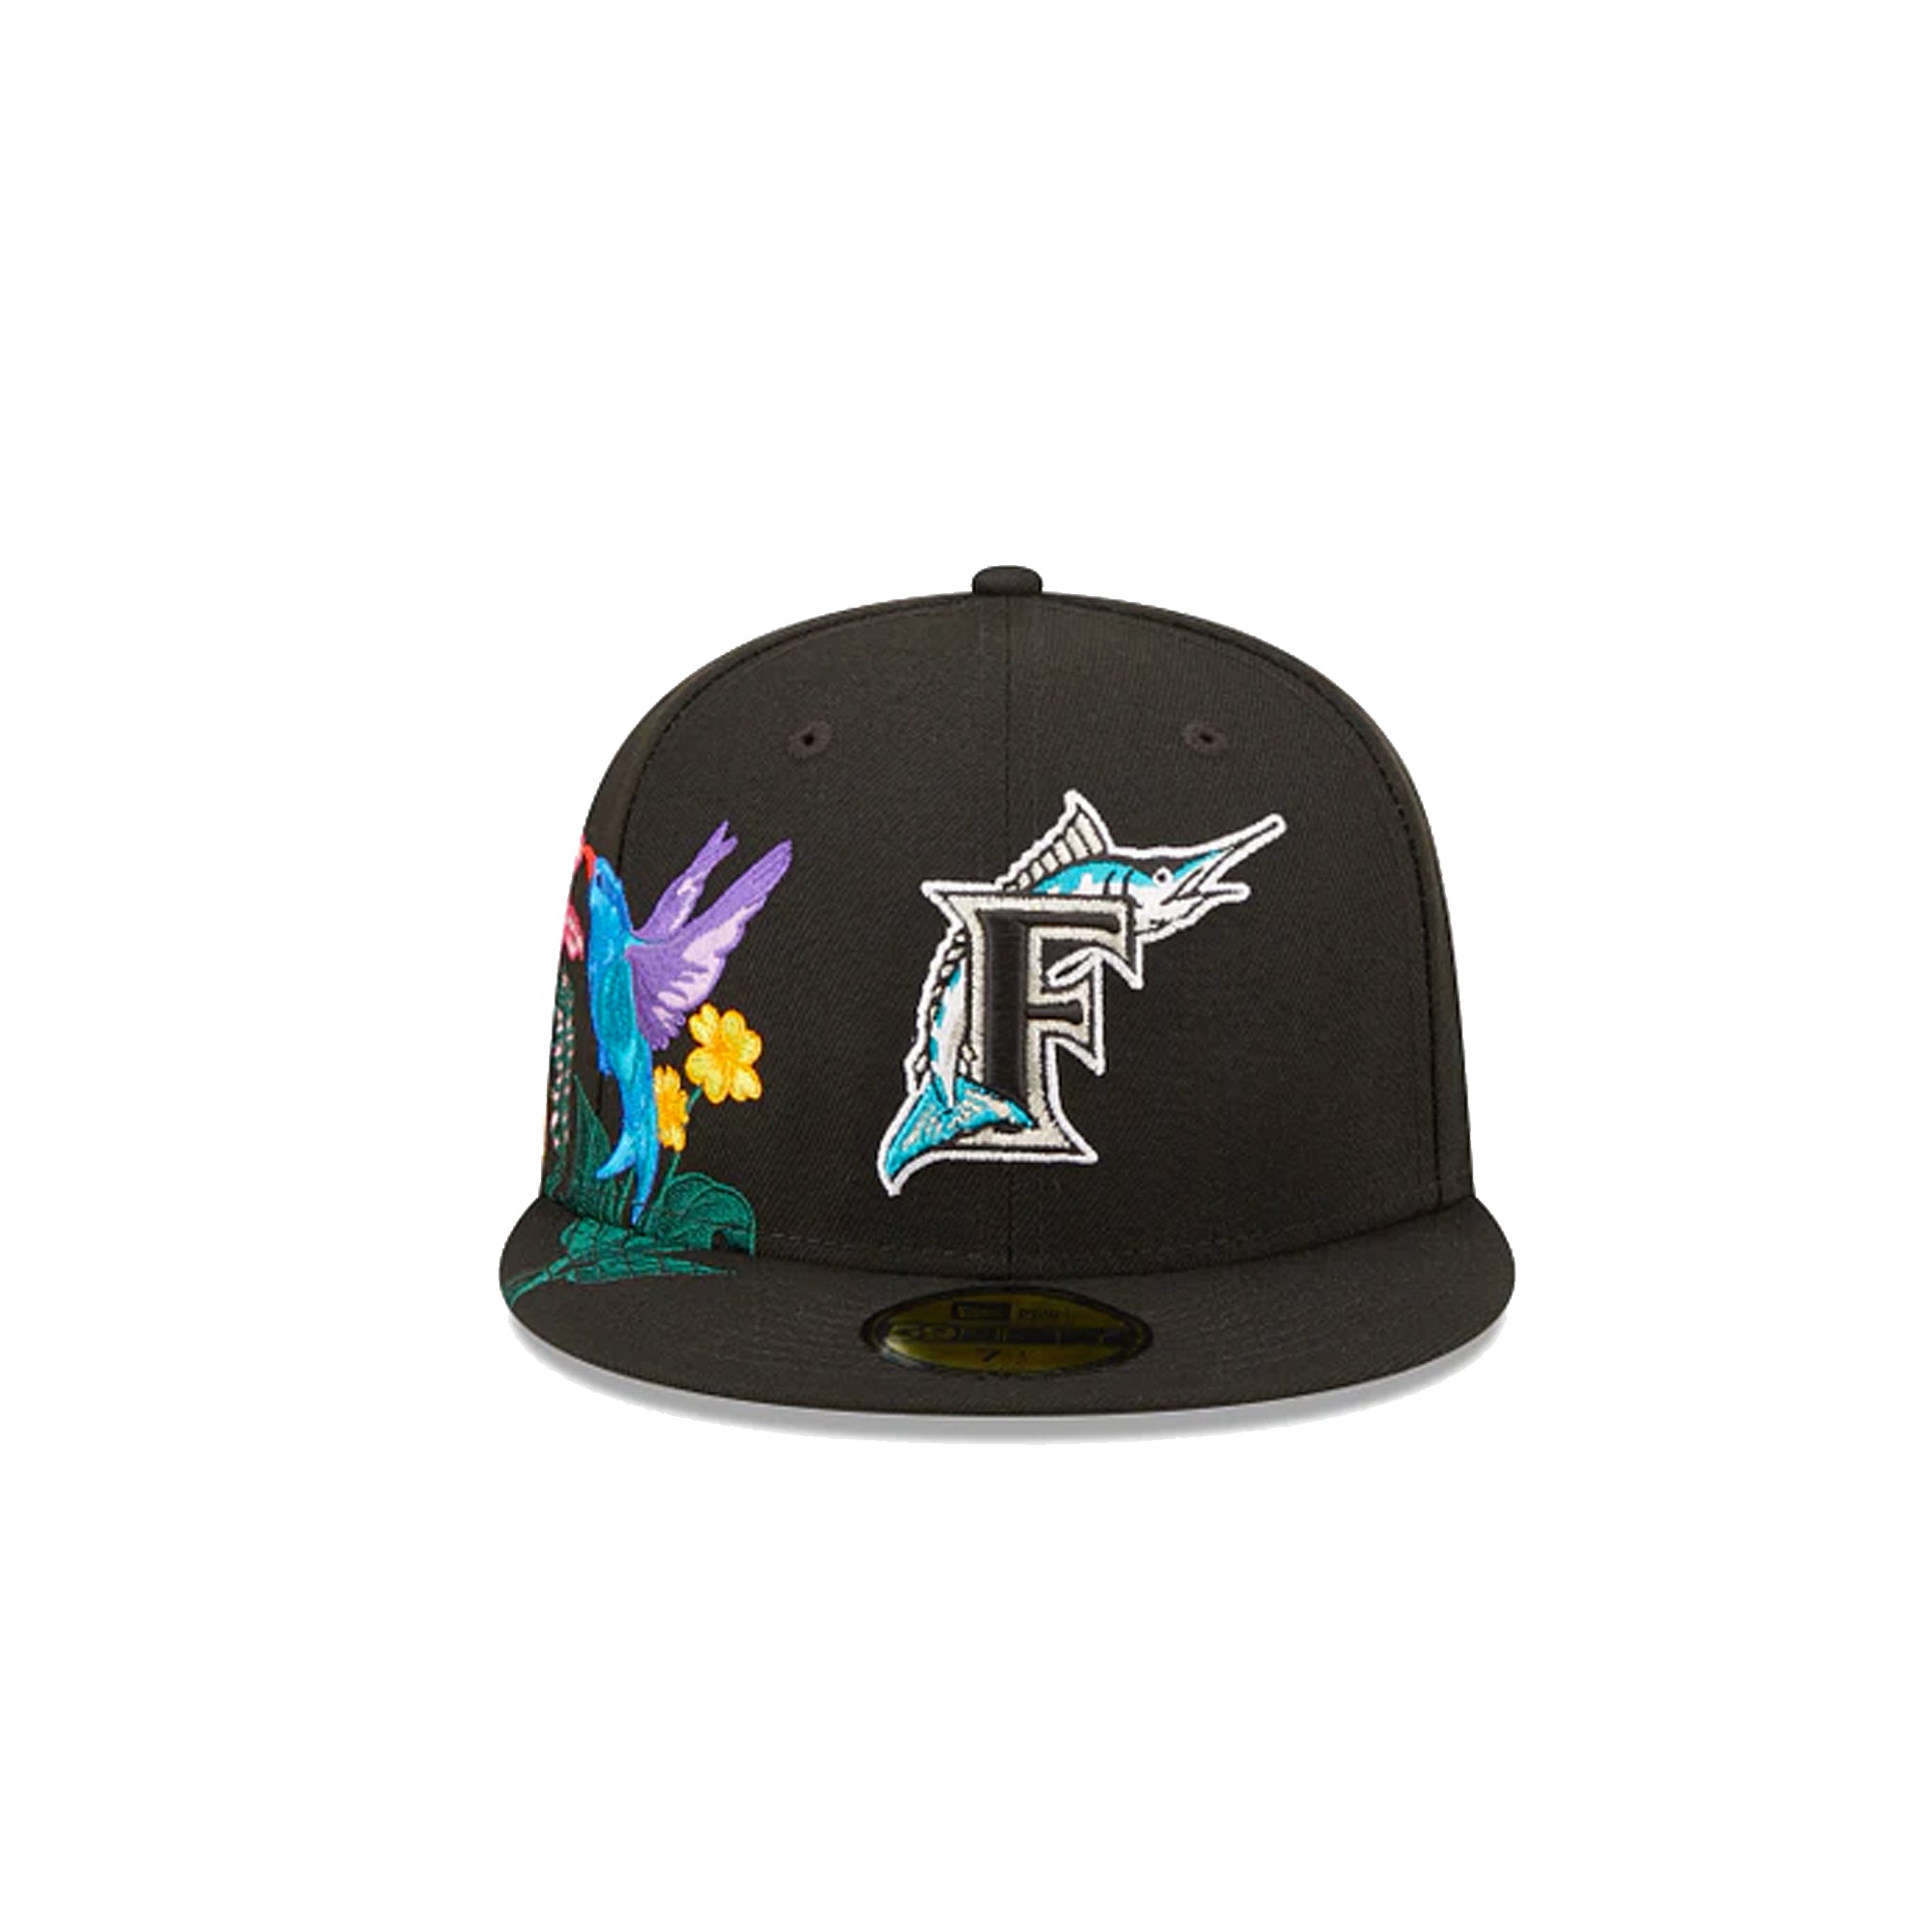 florida marlins new era fitted vintage hat 90s hat cap size 6 3/4